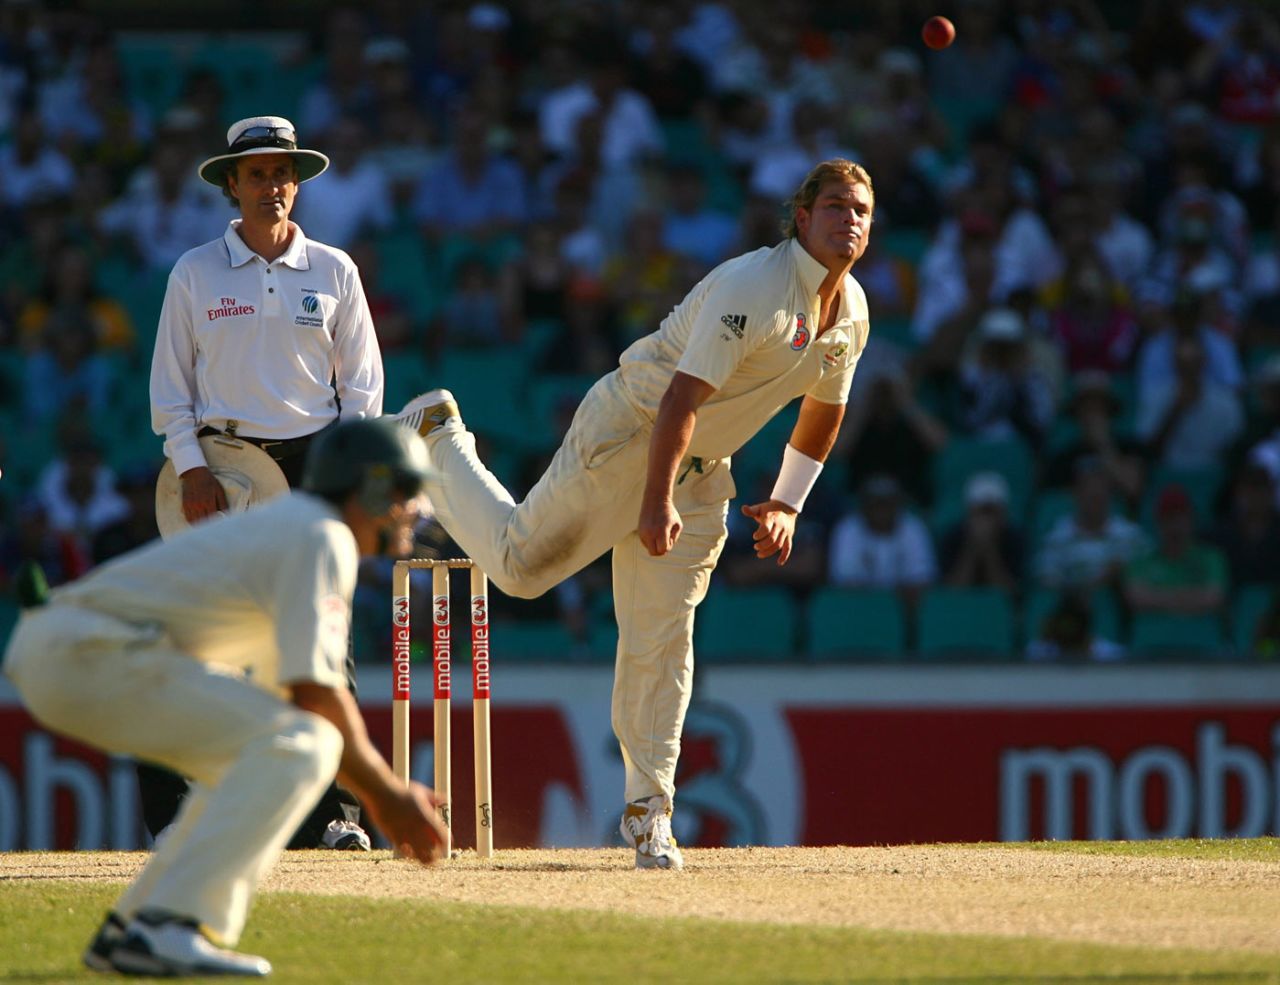 Shane Warne bowls at the end of the third day at the end of the third day, Australia v England, 5th Test, Sydney, January 4, 2007